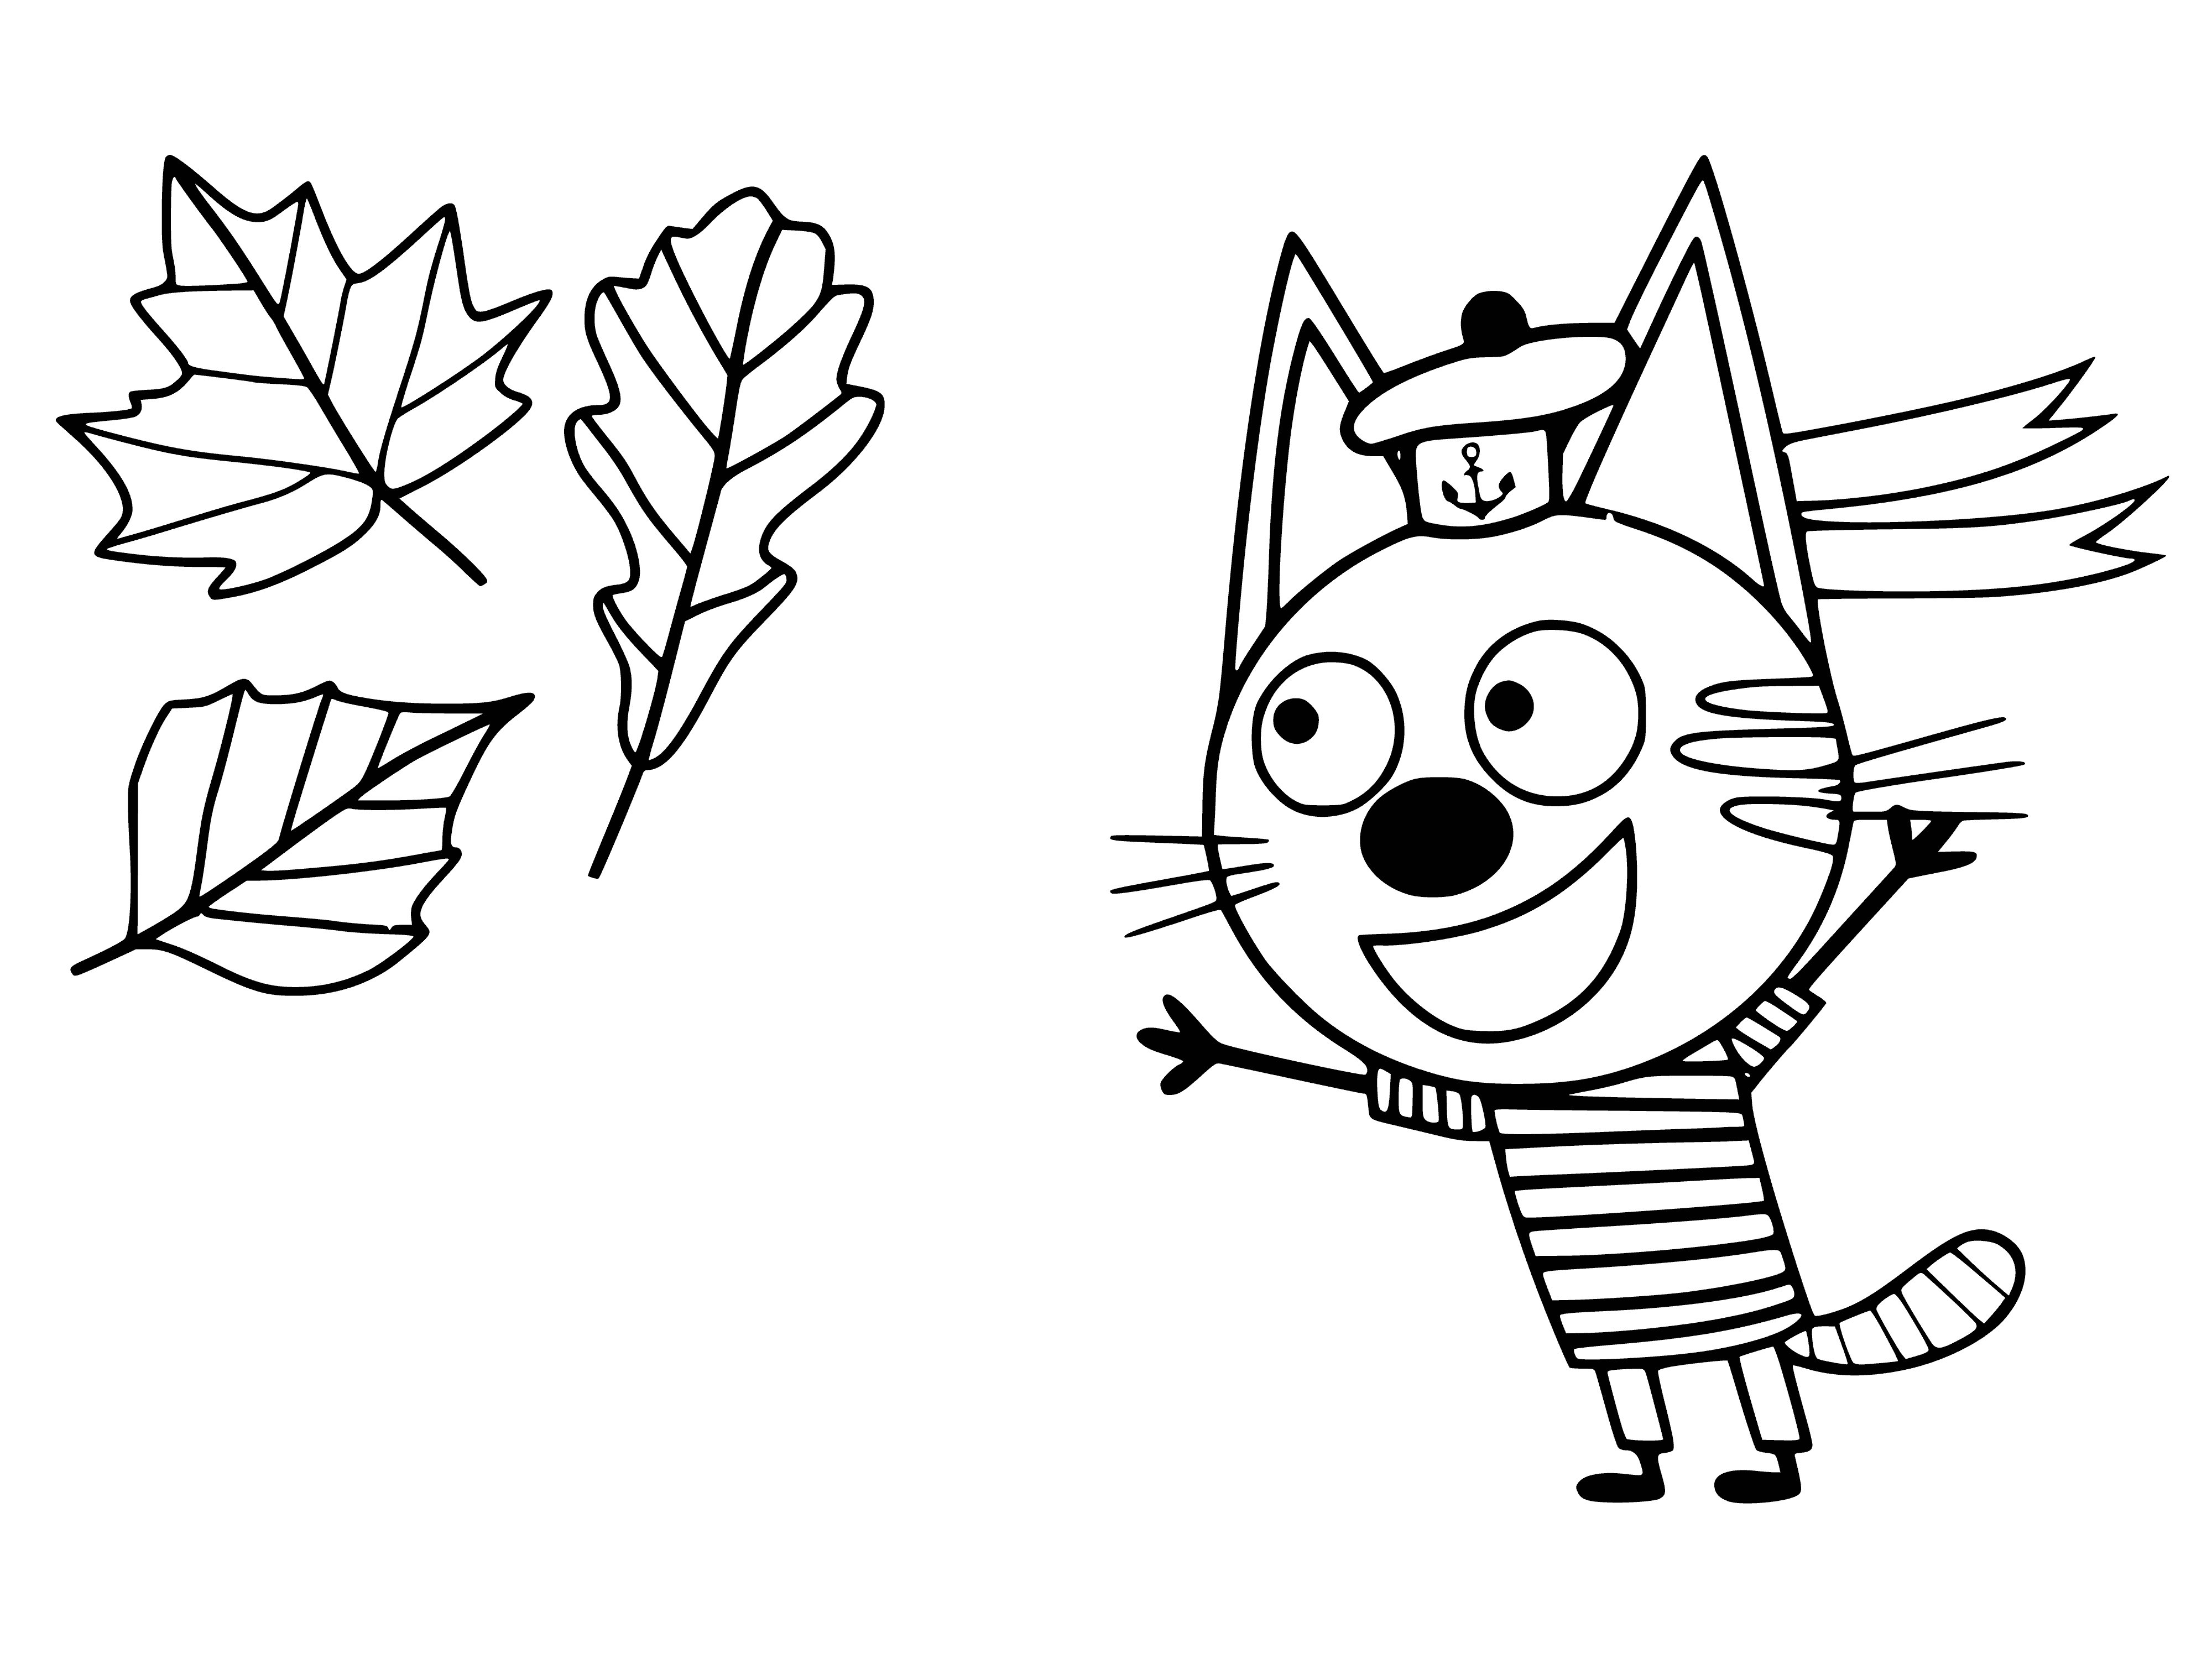 coloring page: Three cats w/brown fur, white patch/stomach, facing left/right, paws/mouths open.